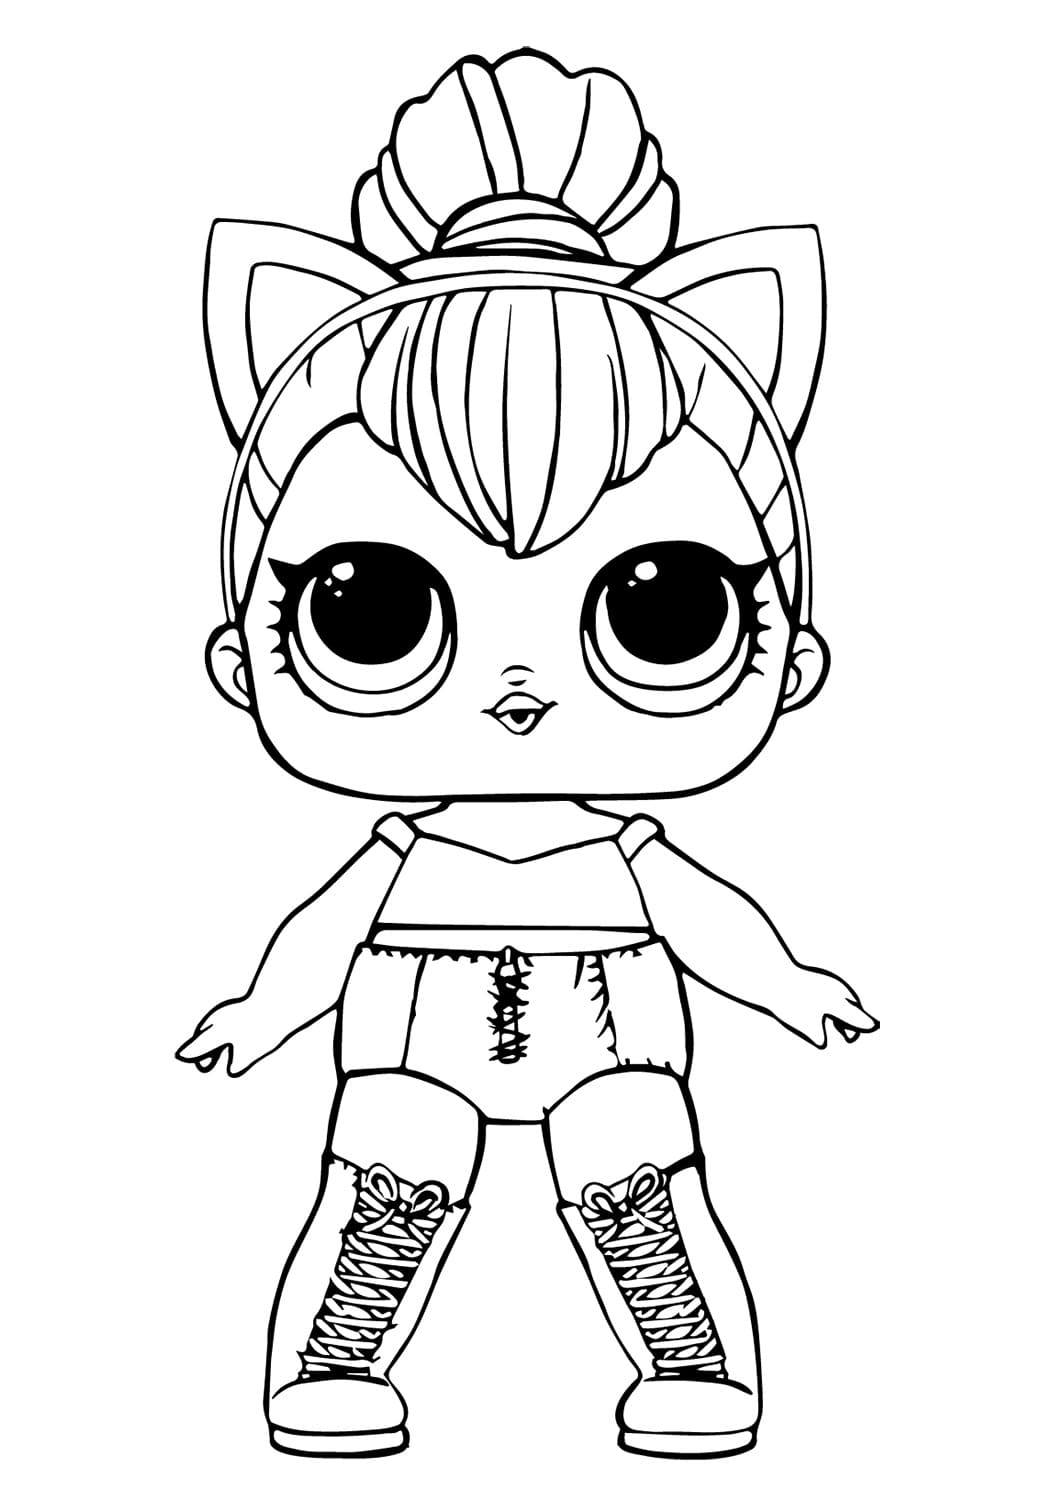 Kitty Queen Lol coloring page